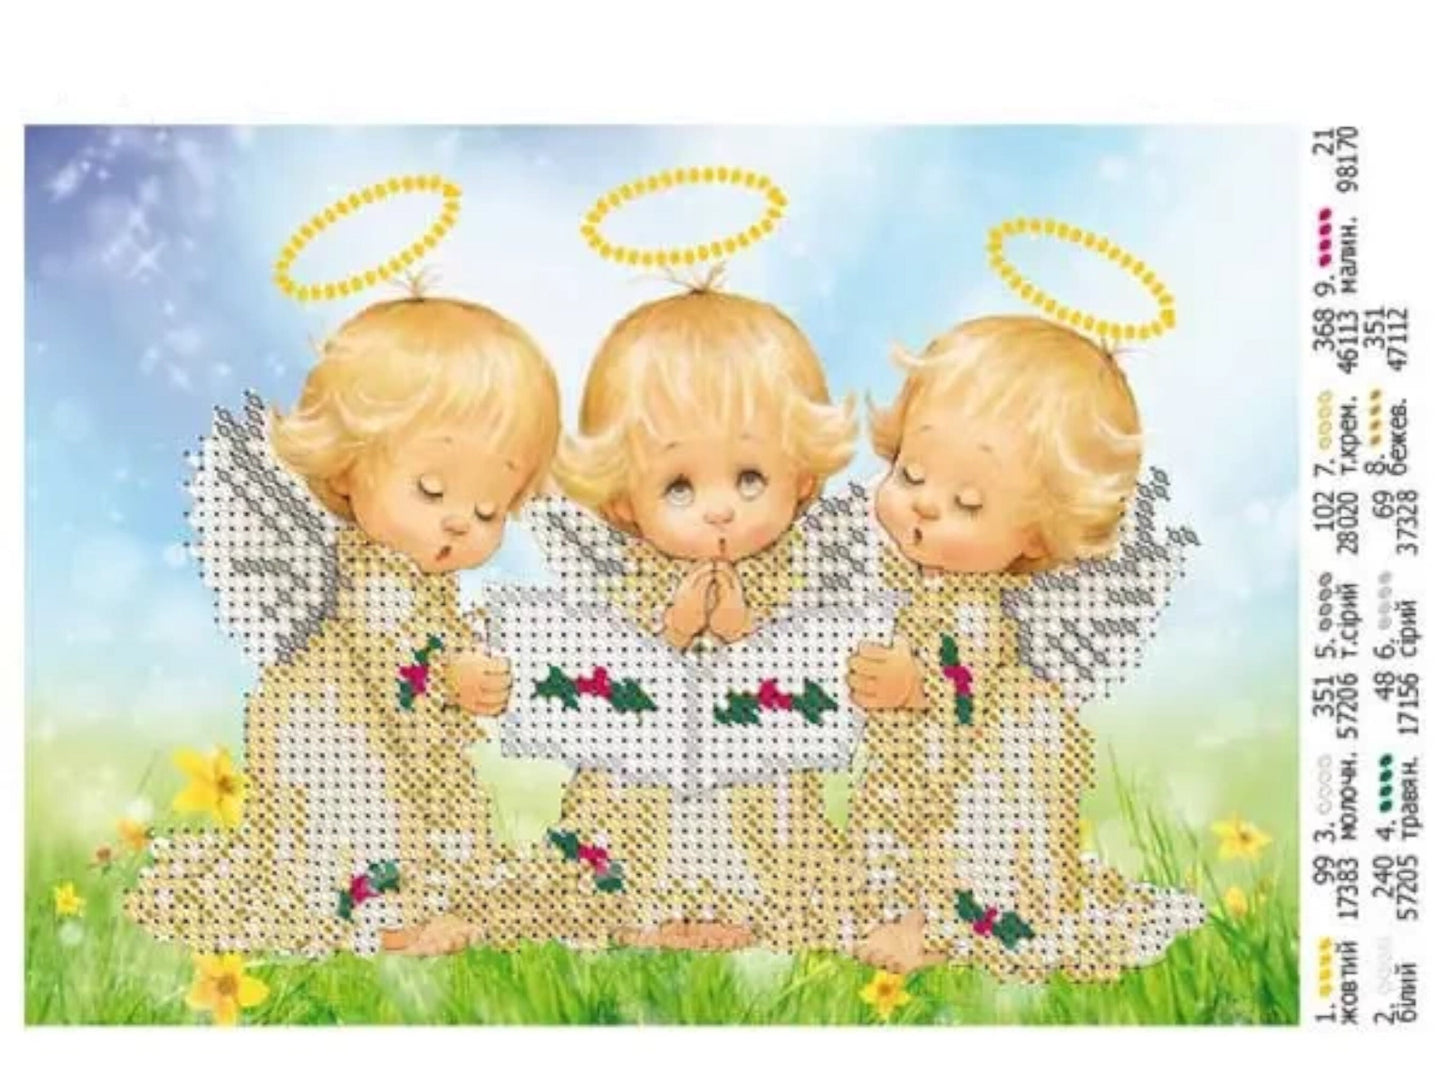 Small Bead embroidery kit "Сhoir of angels". Size: 6.7-5.5 in (17-14cm) - VadymShop